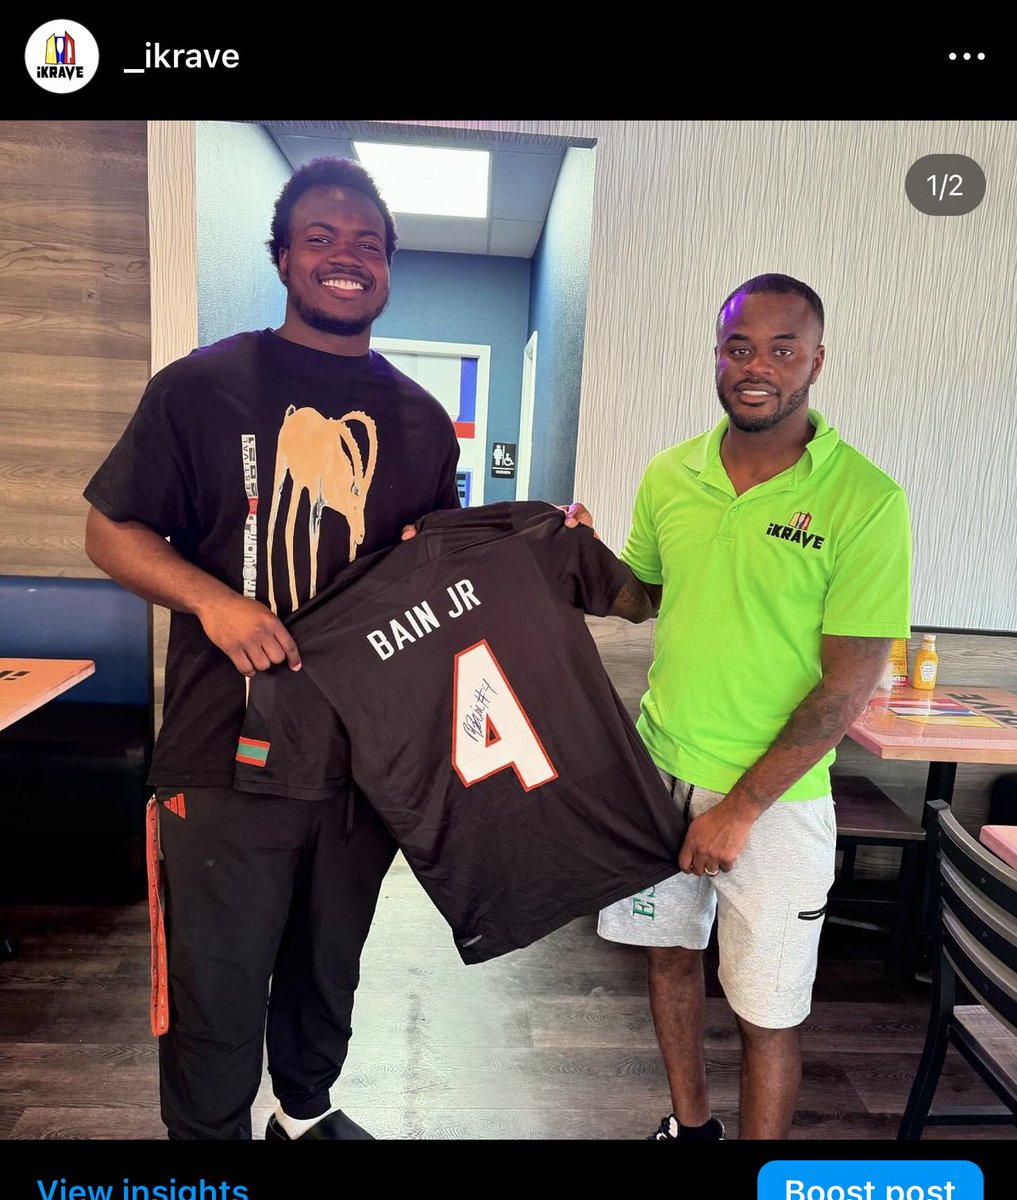 Thank you ✊🏿 Bain signed jersey for IKrave 🔥✊🏿